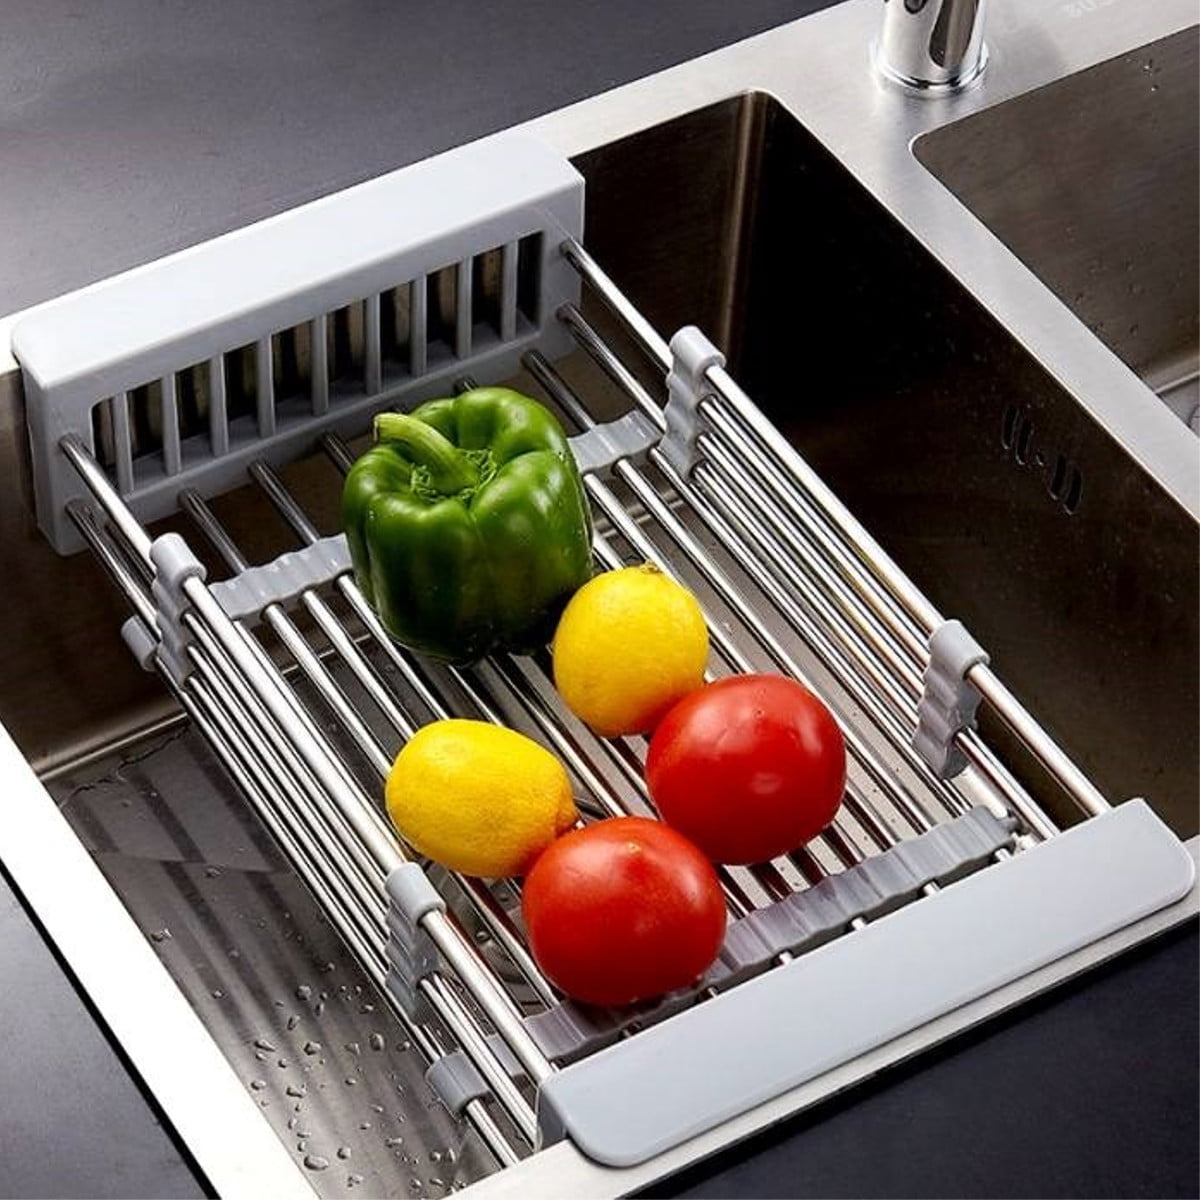 Dish Drying Rack, Stainless Steel Dish Rack And Drainaboard Set,  Expandable(11.5-19.3) Sink Dish Drainer With Cup Holder Utensil Holder  For Kitchen